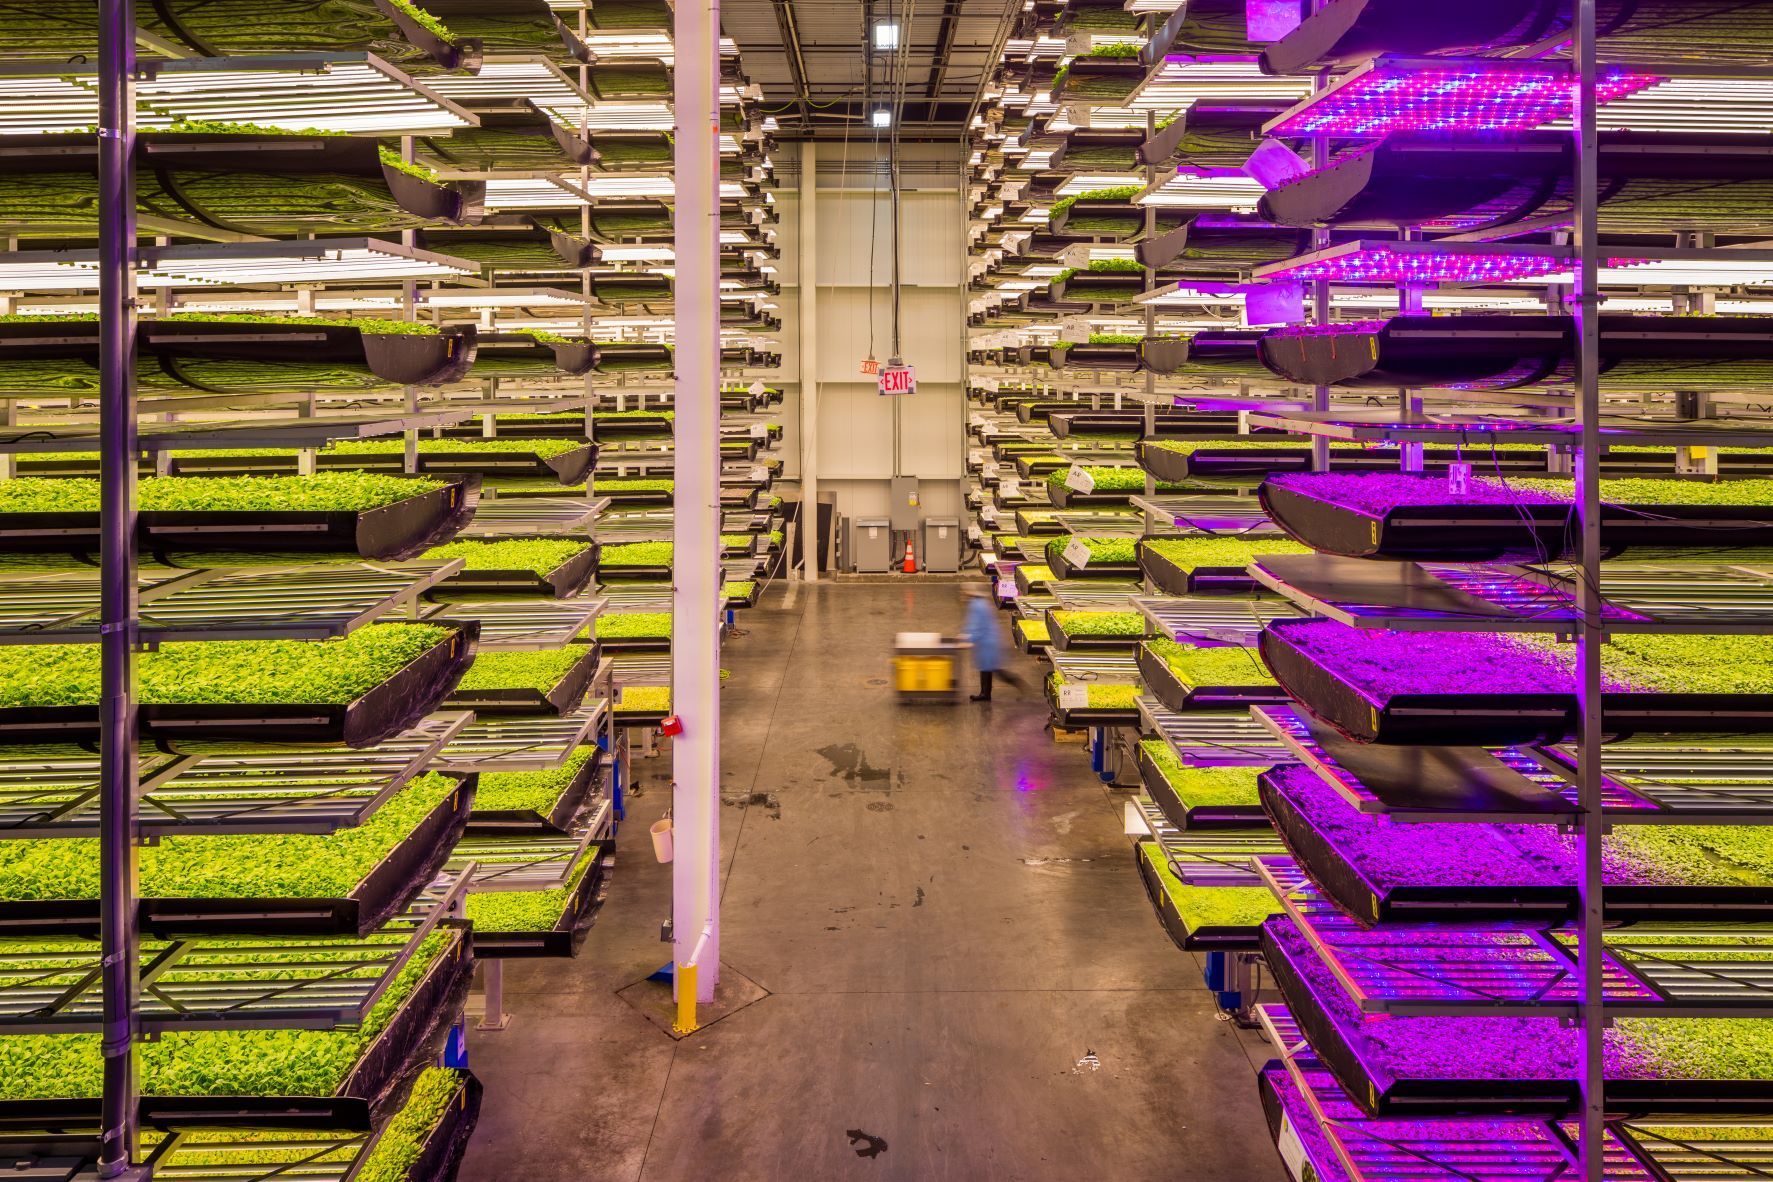 World's Largest Indoor Vertical Farm: world record in Newark, New Jersey